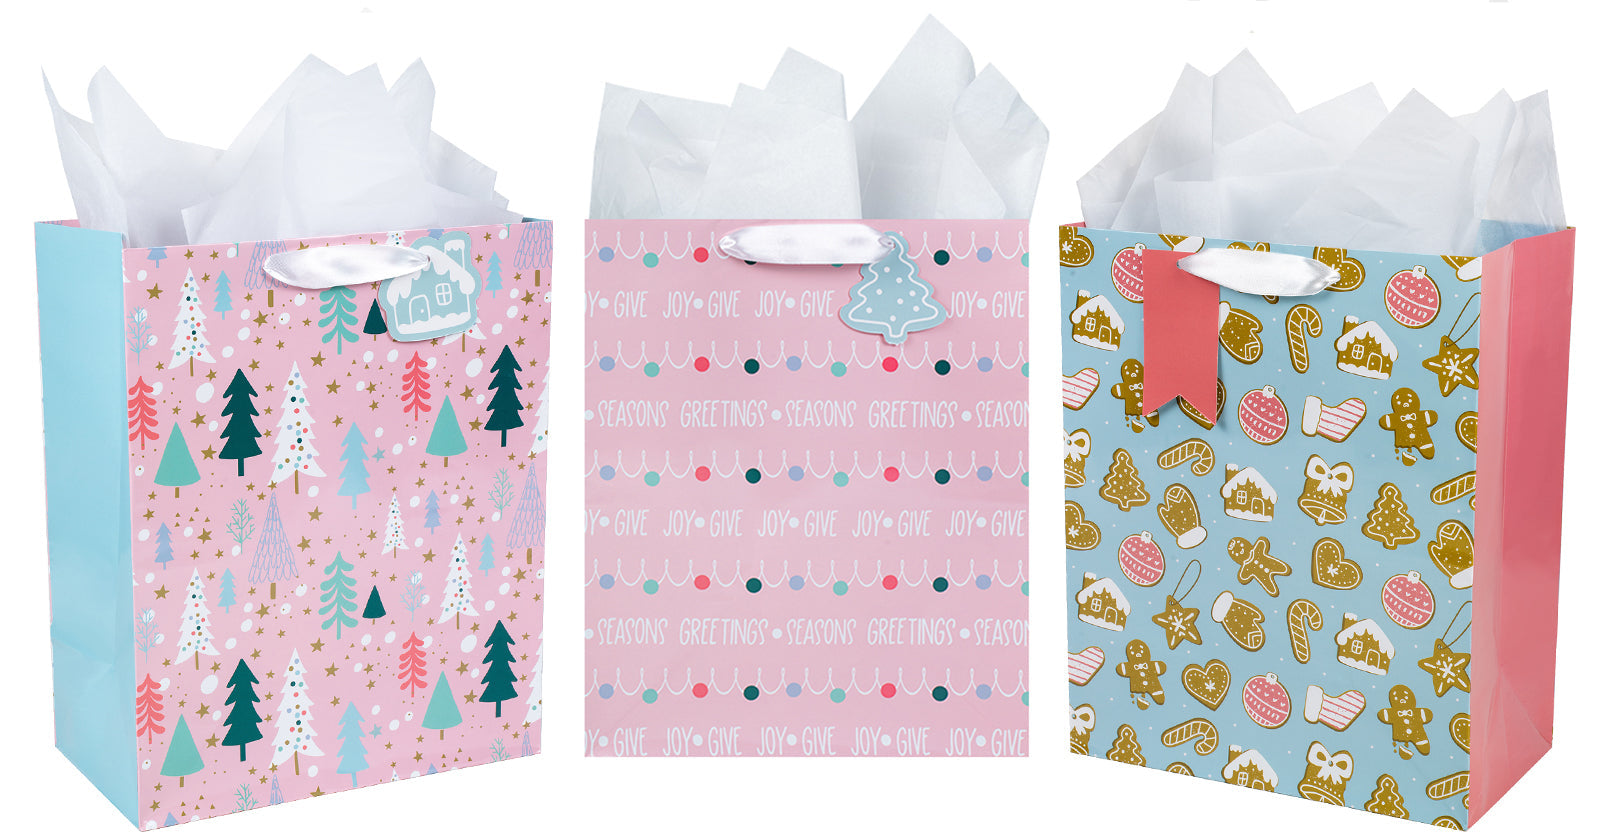 Assort Large Christmas Gift Bag Pink 9 Pack 10"x5"x13"